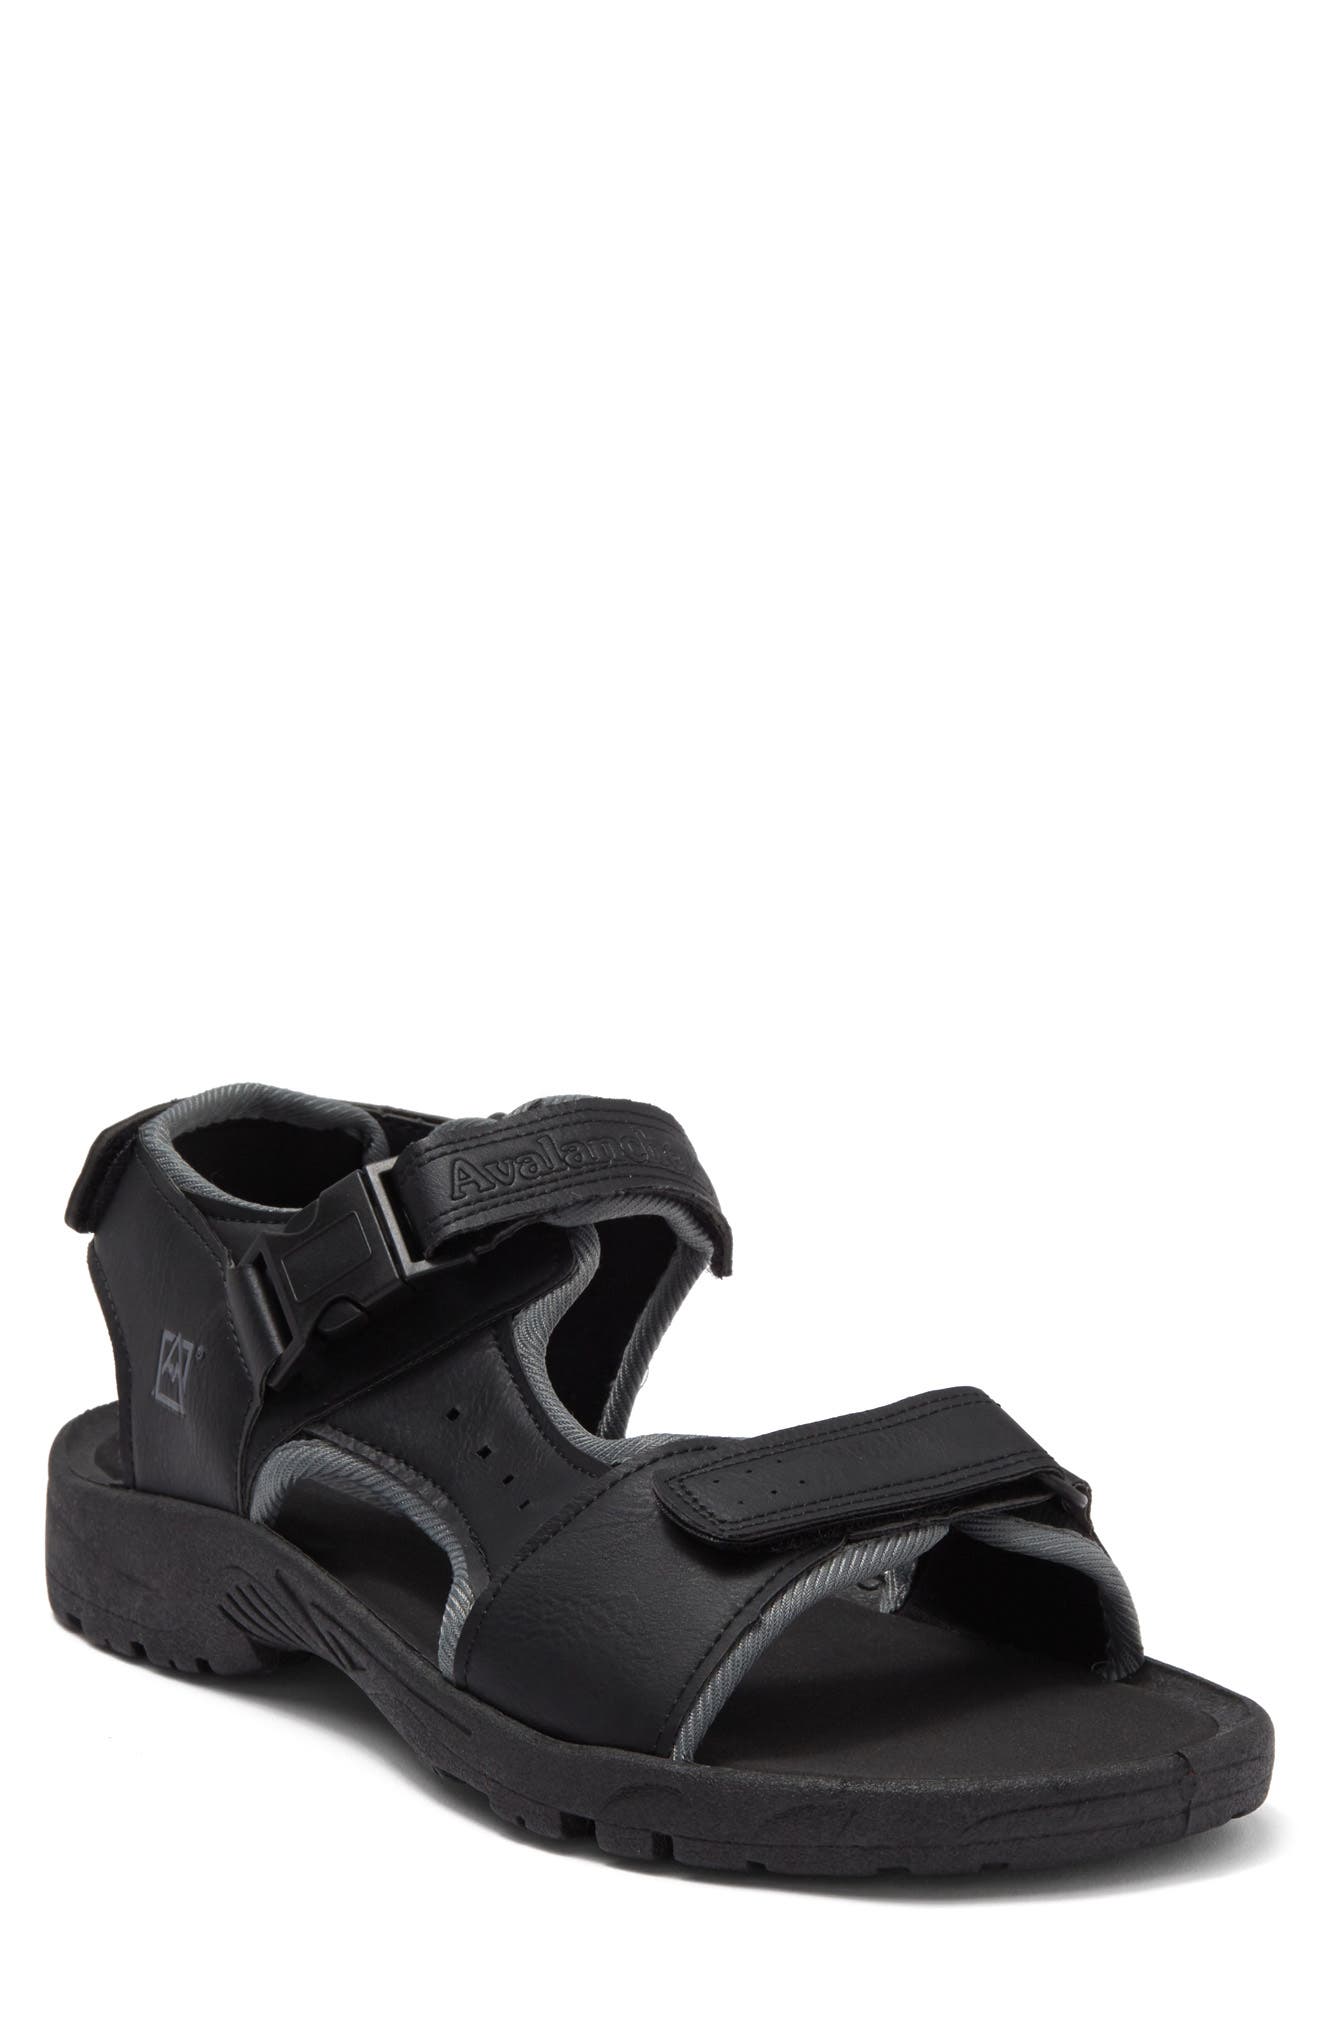 Avalanche Open Toe Hiking Sandal In Black